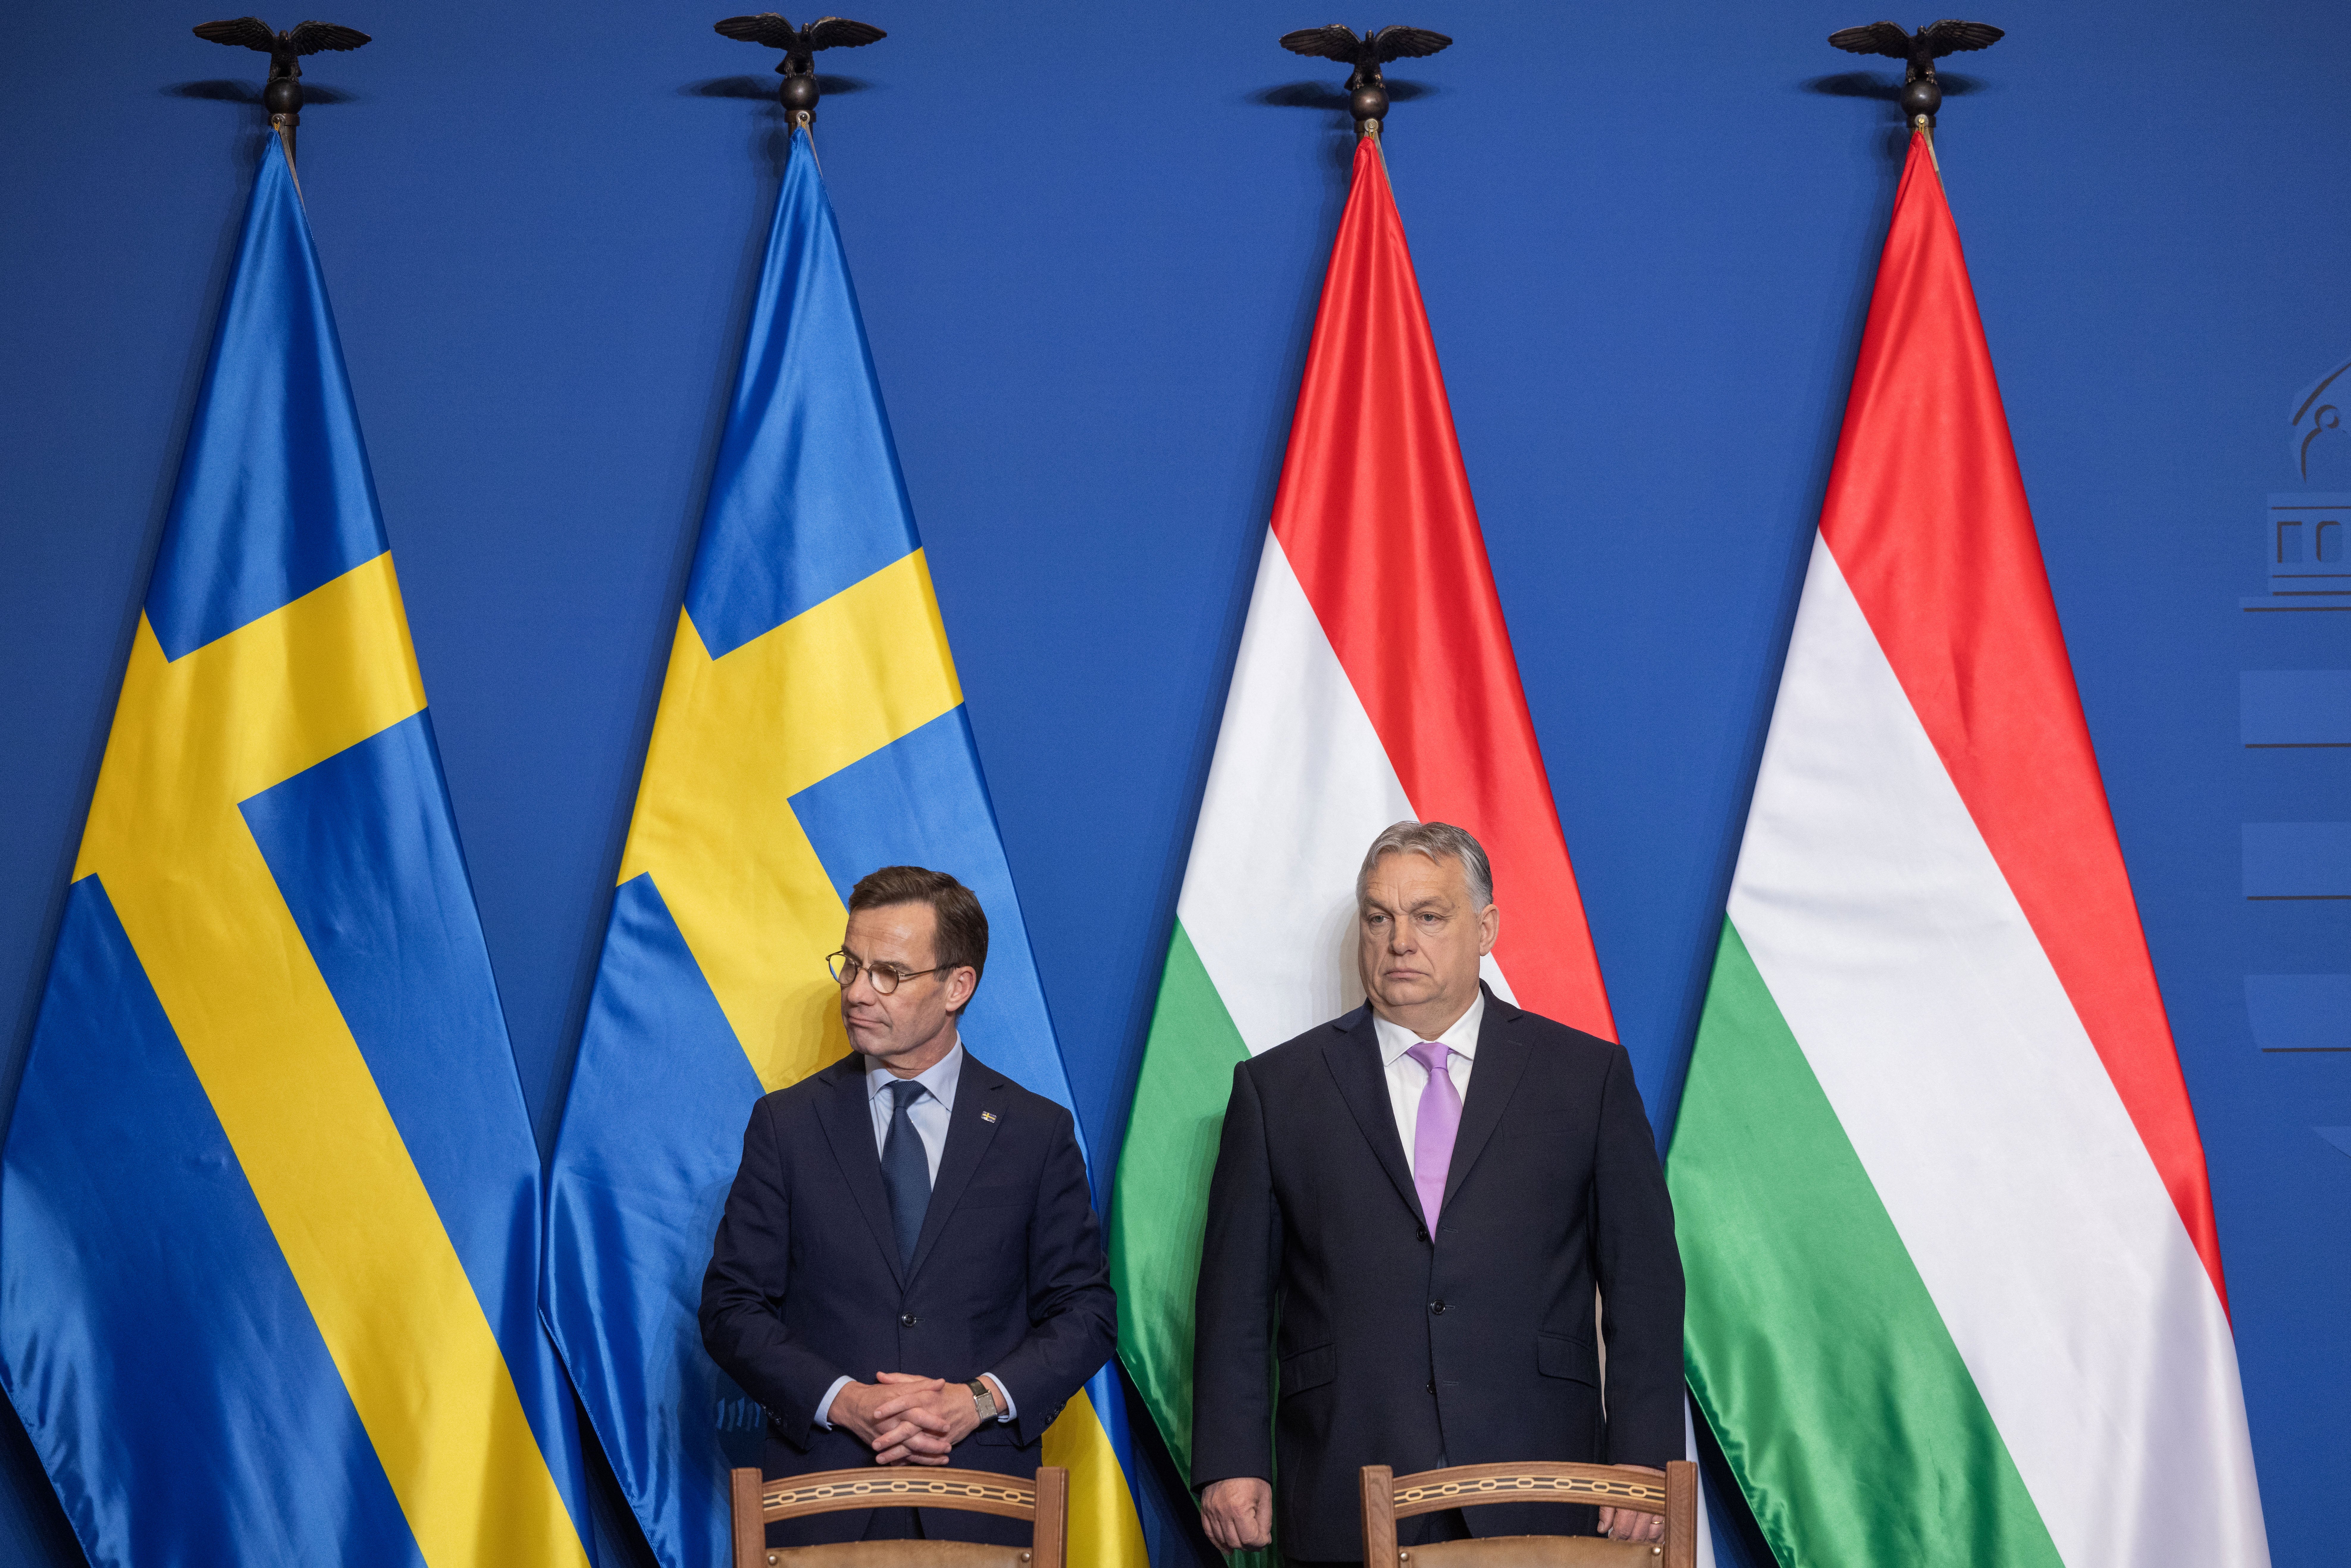 BUDAPEST, HUNGARY - FEBRUARY 23: Hungary's Prime Minister Viktor Orban (R) and Swedish Prime Minister Ulf Kristersson (L) hold a press conference following their meeting in February 23, 2024 in Budapest, Hungary. The meeting comes as Hungary's ruling party has indicated it's prepared to ratify Sweden's accession to NATO. After Turkey dropped its objection, Hungary remained the only NATO member to oppose Sweden's bid, which was launched in the wake of Russia's large-scale invasion of Ukraine. (Photo by Janos Kummer/Getty Images)